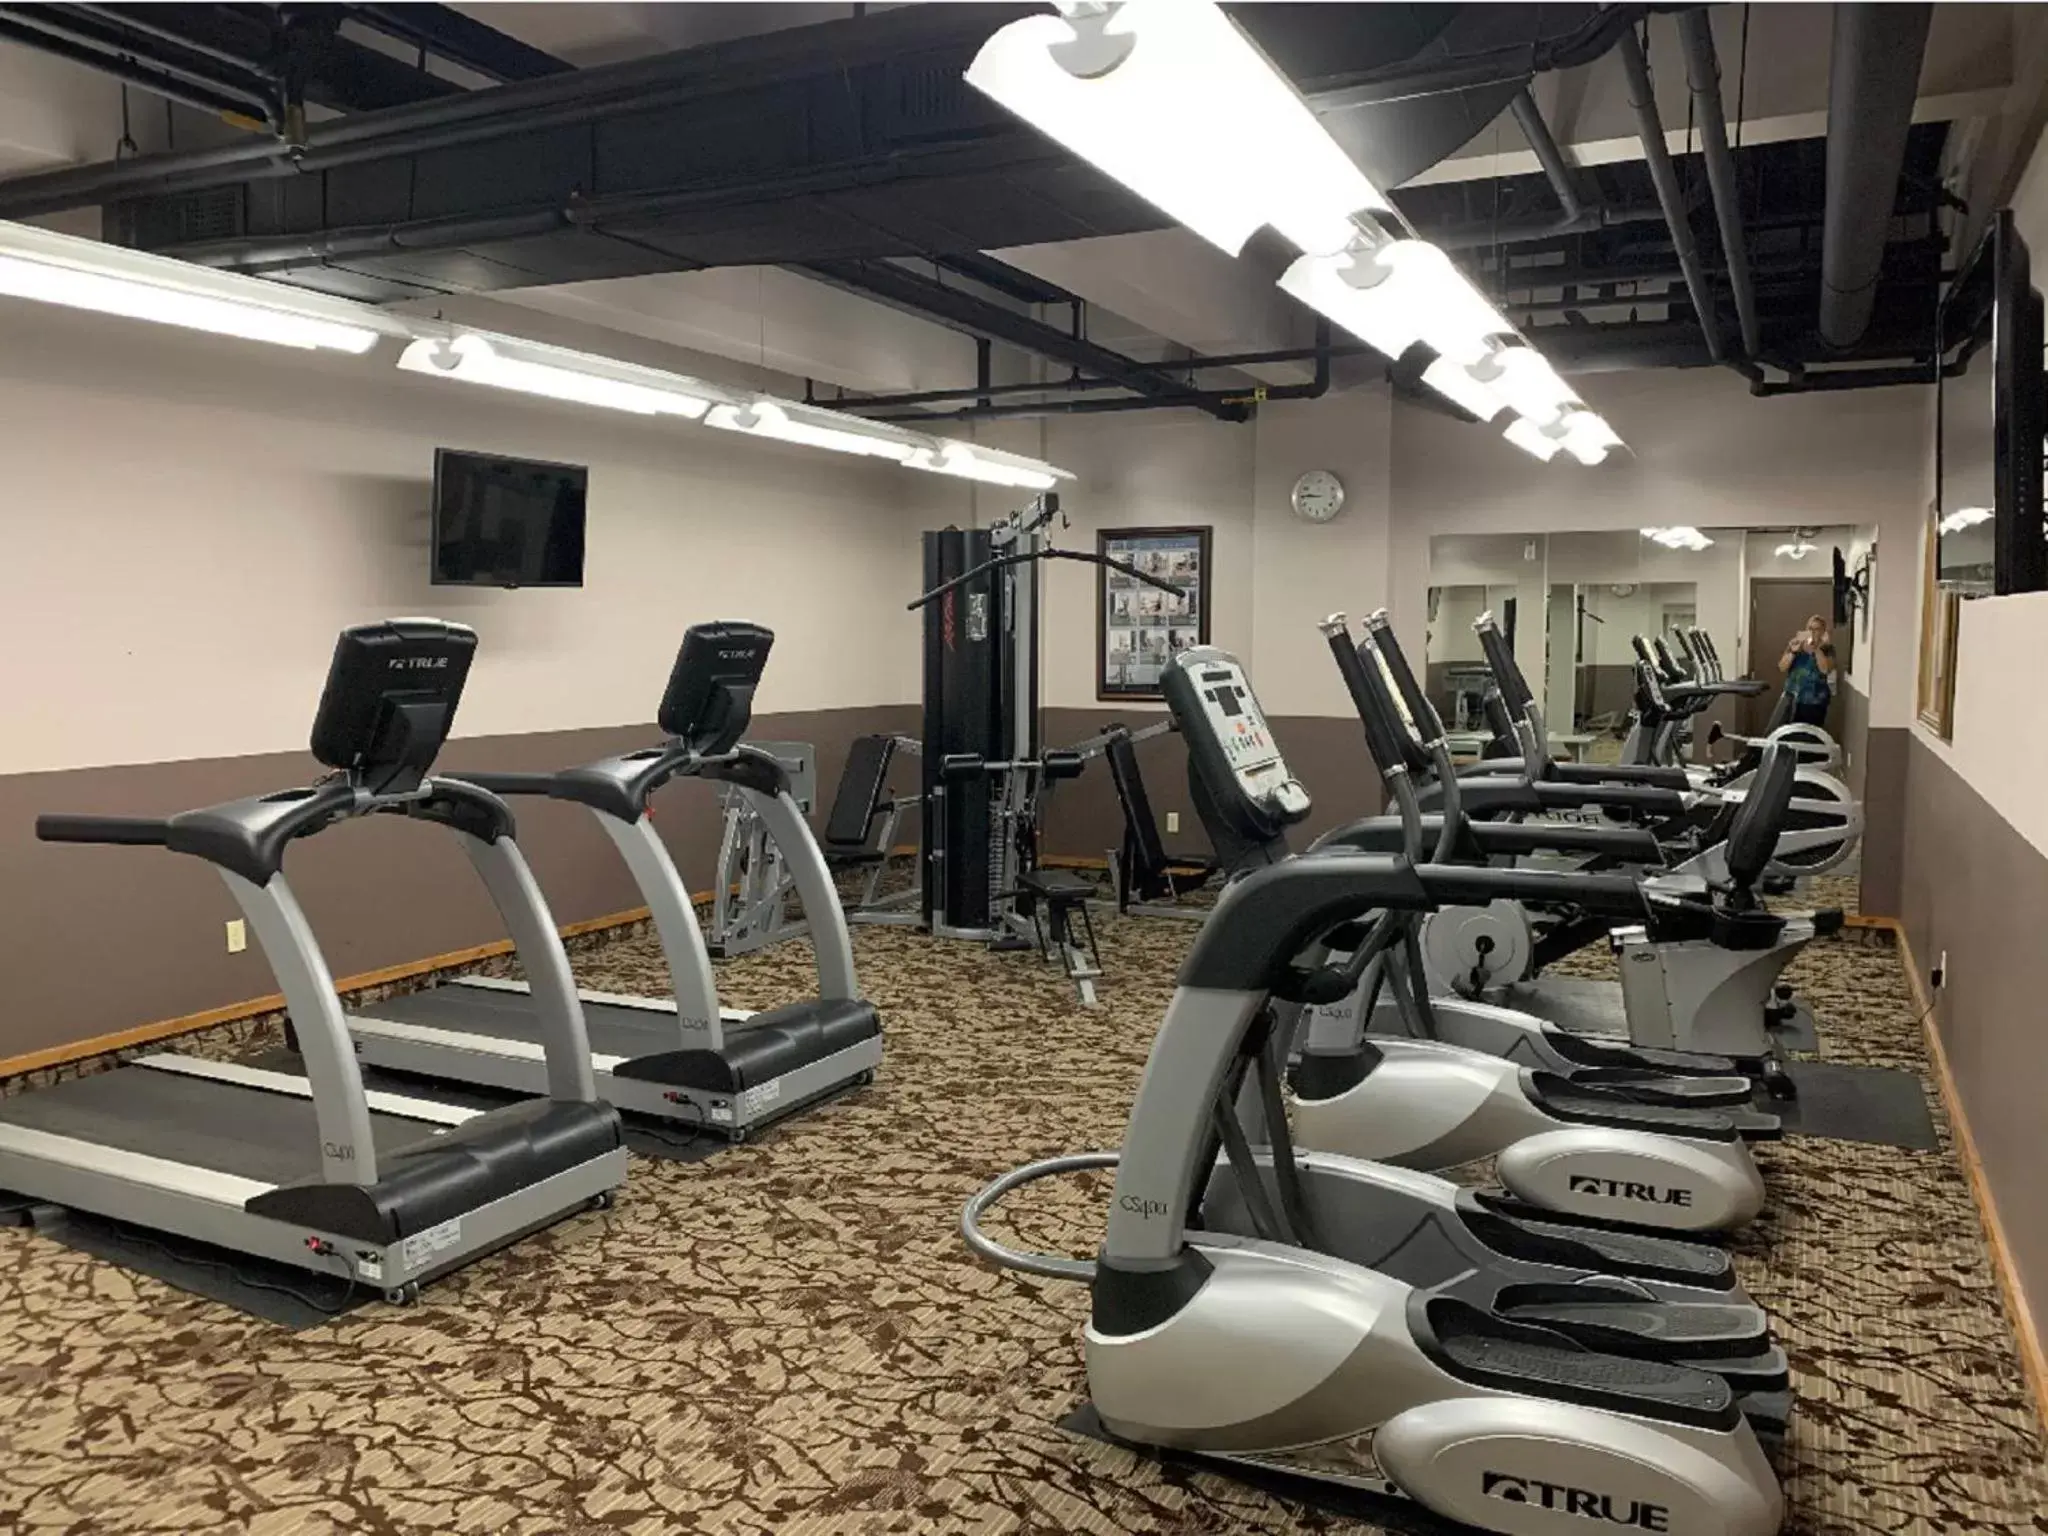 Fitness centre/facilities, Fitness Center/Facilities in Morning Star Lodge - Hosted by Linda